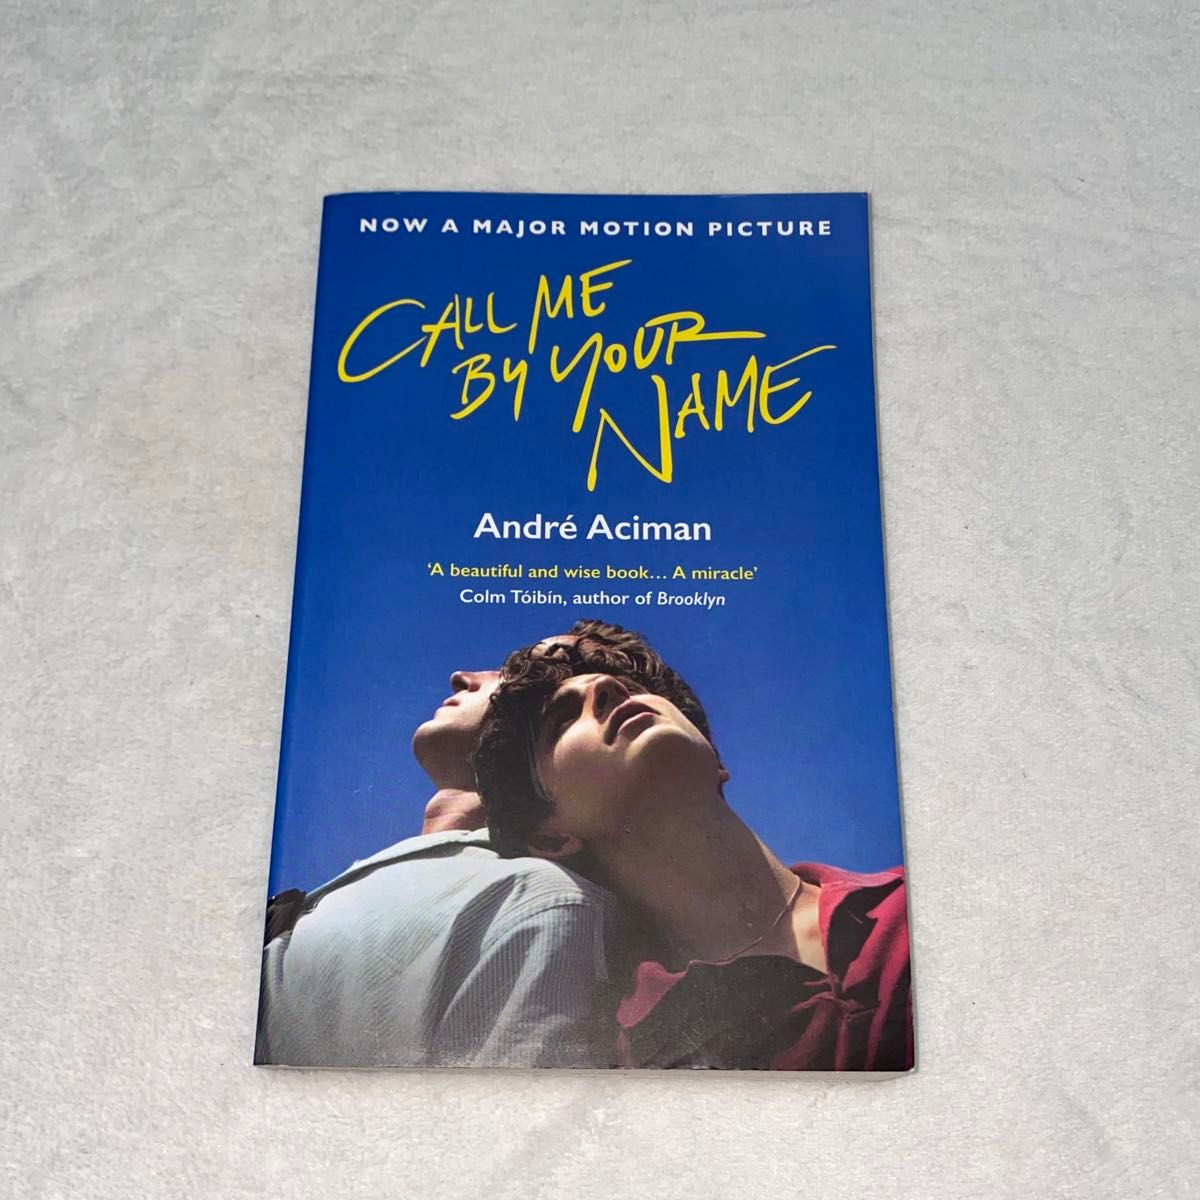 Call Me By Your Name 君の名前で僕を呼んで 洋書　本　映画